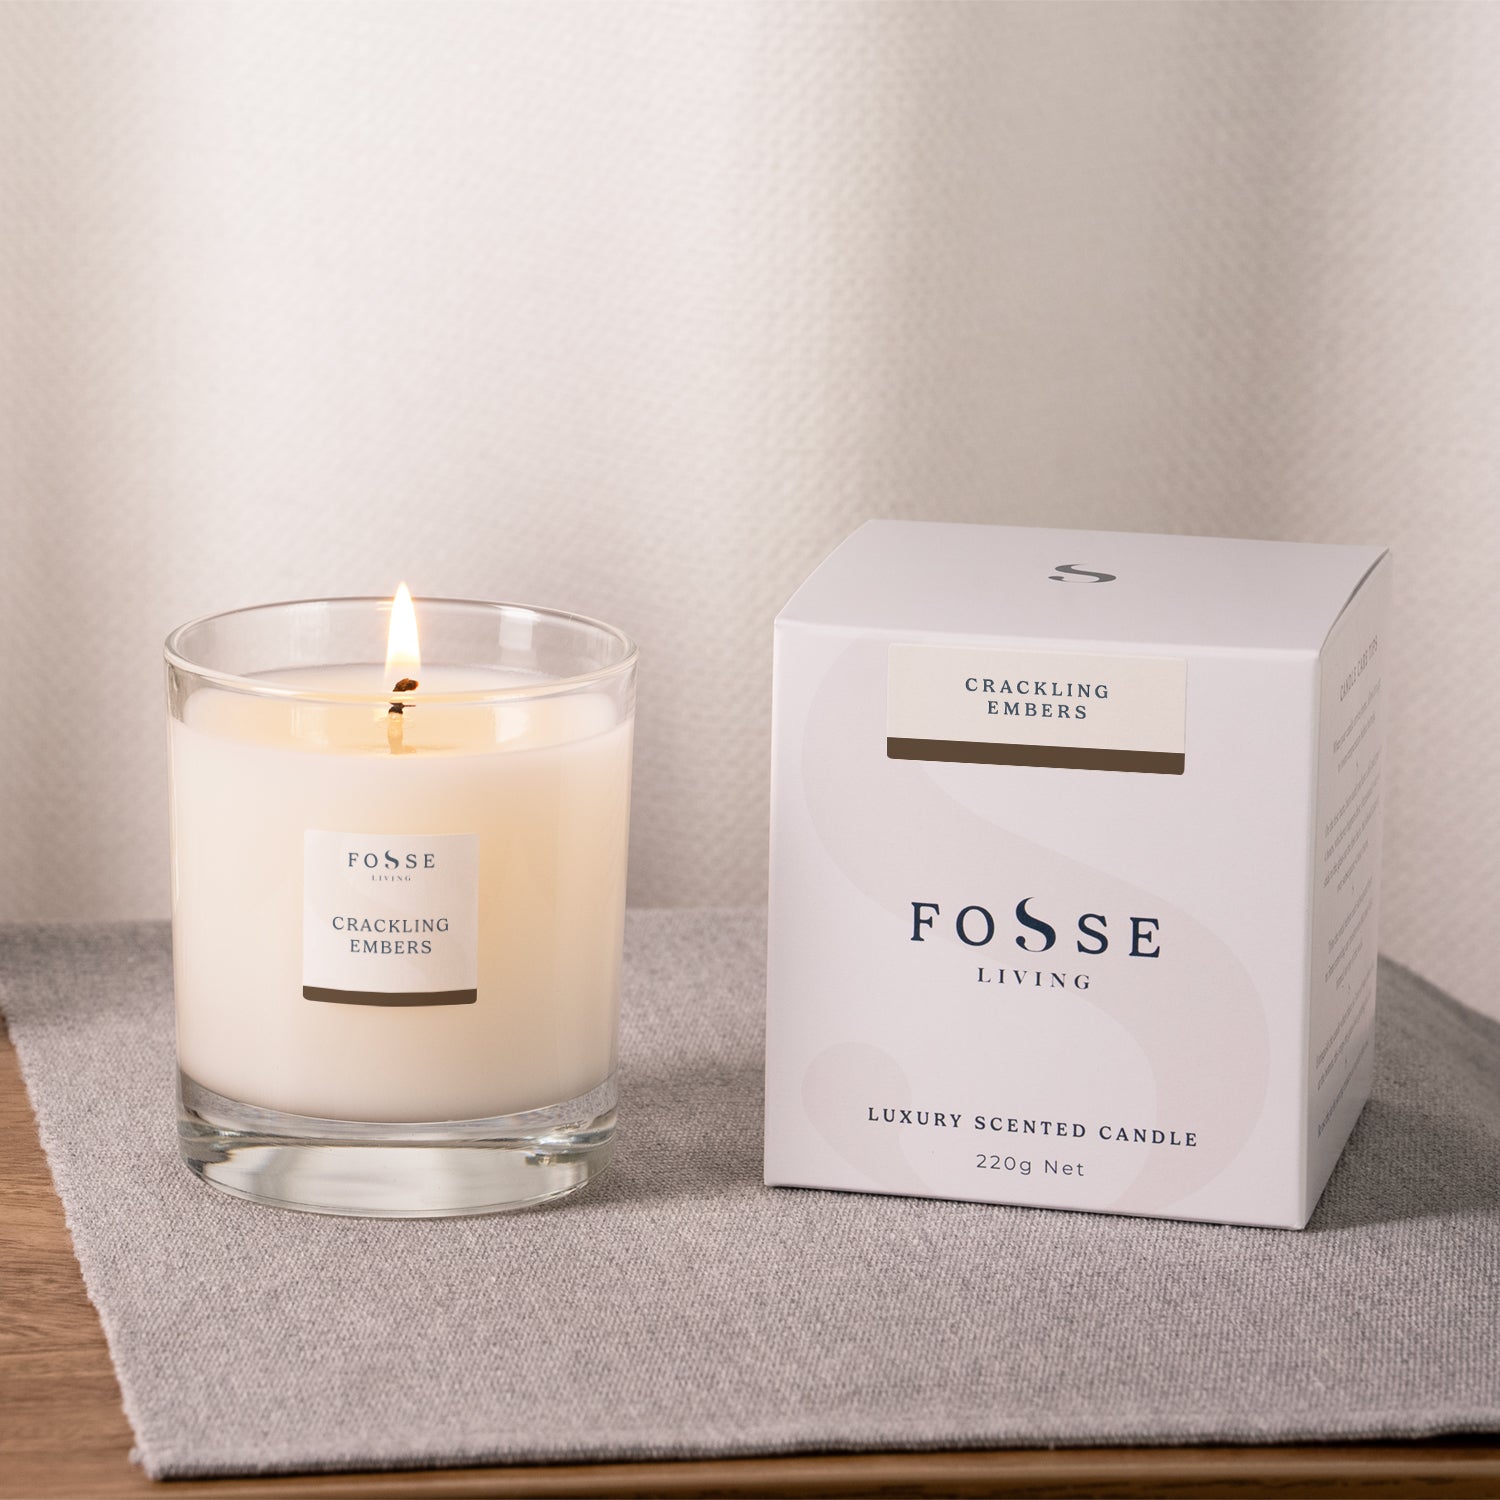 Crackling Embers Scented Candle - Fosse Living | Luxury Home Fragrances